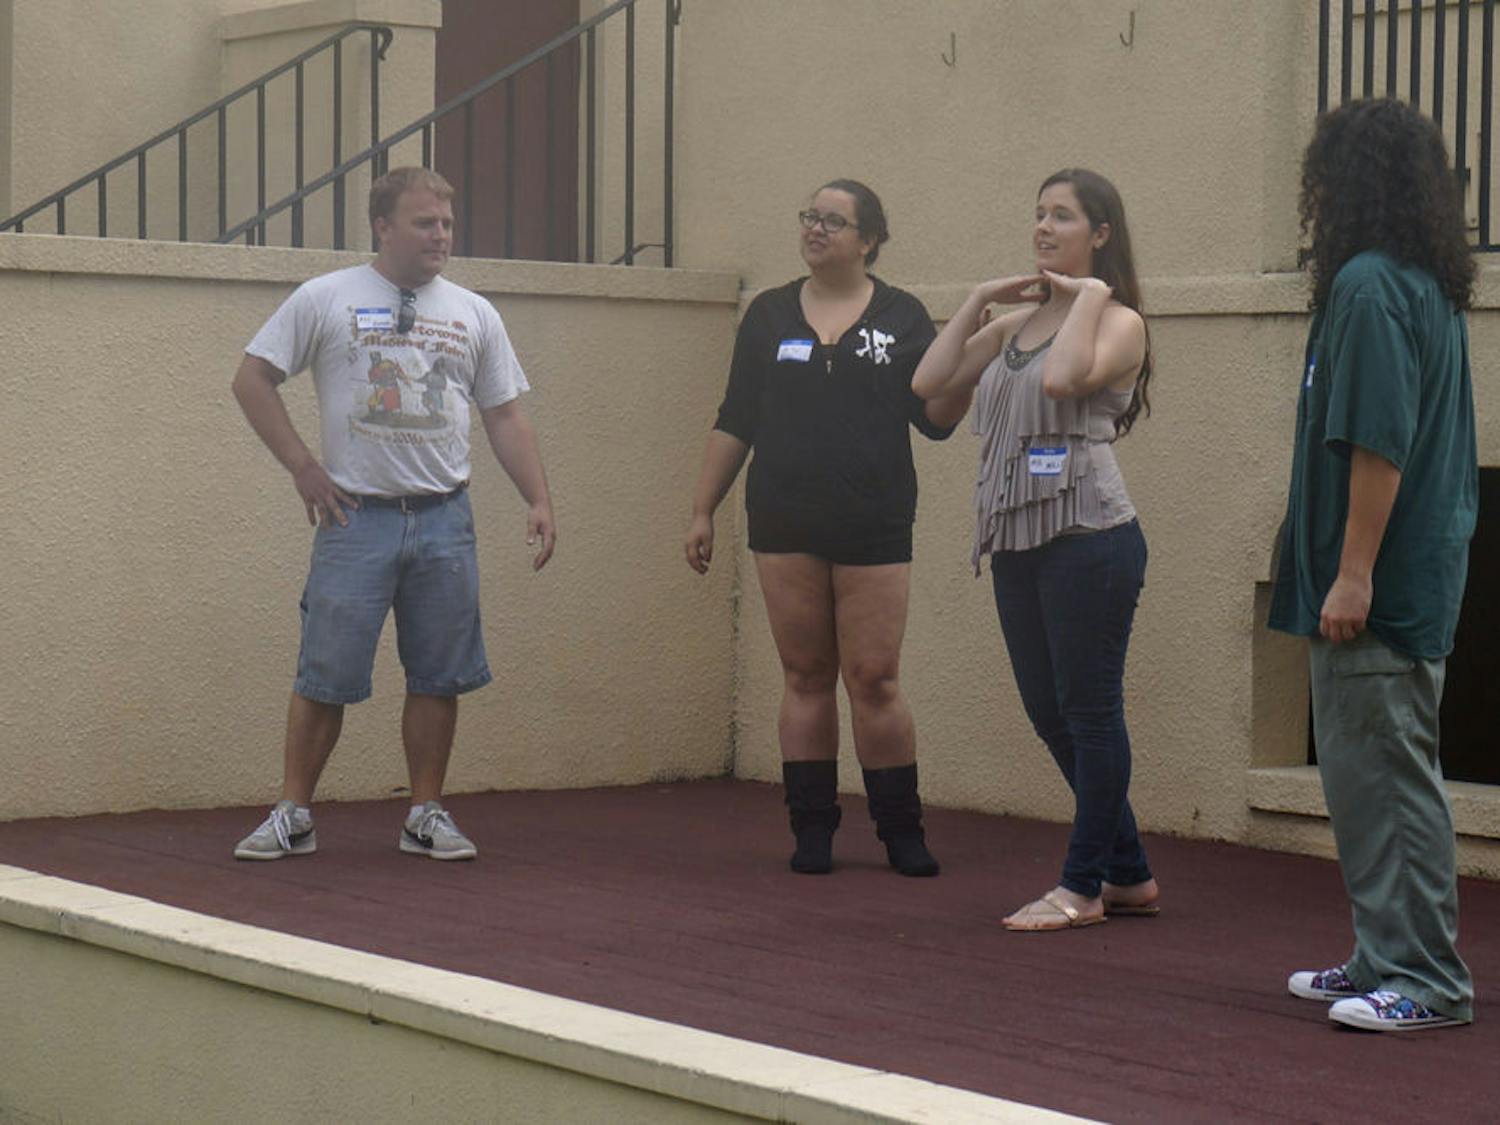 Guild members (from left) Scott West, Kayte Sands, Mollie Lassiter and Miranda Lipsig perform a skit during Thieves Guild auditions at the Thomas Center Galleries on Aug. 29, 2015.